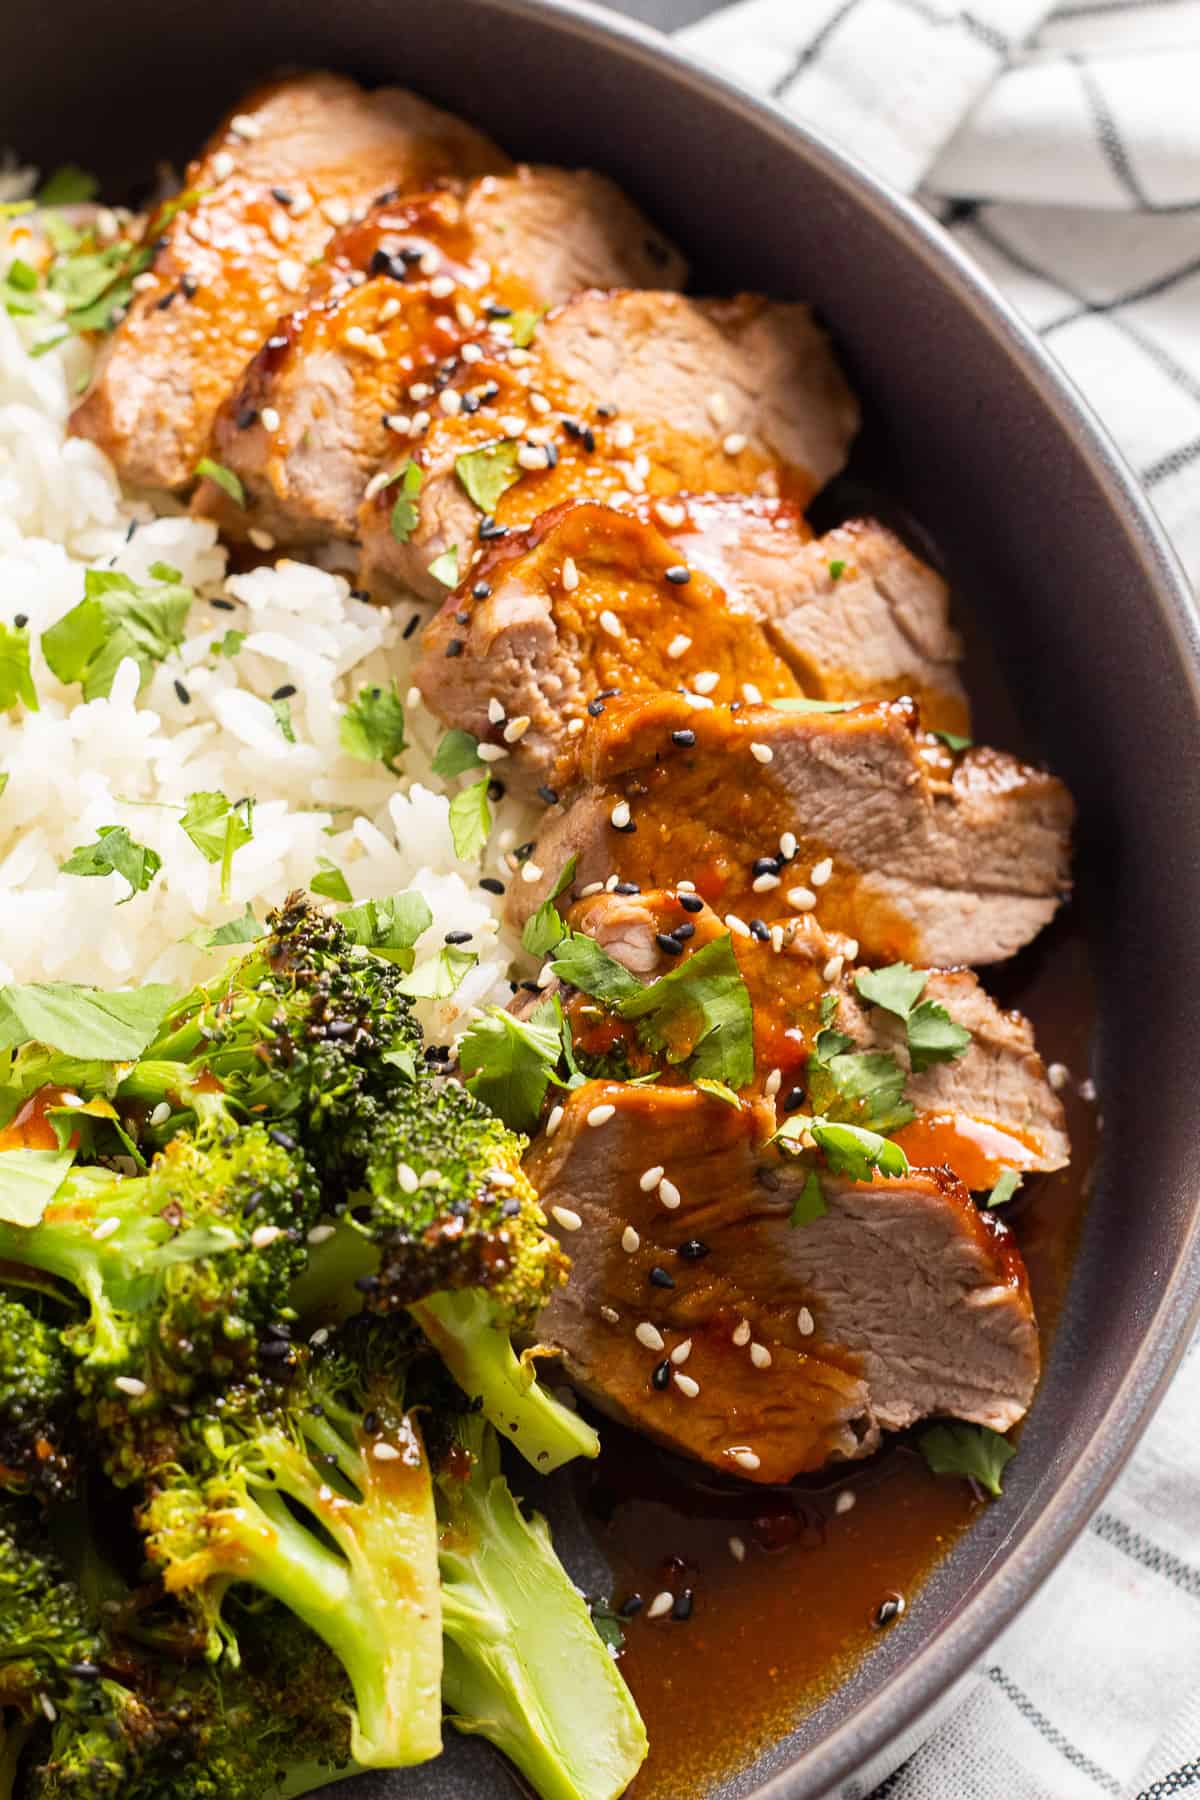 Pork tenderloin slices sit on a bed of rice alongside roasted broccoli and are drizzled with a orange-red sauce and sprinkled with sesame seeds and cilantro.